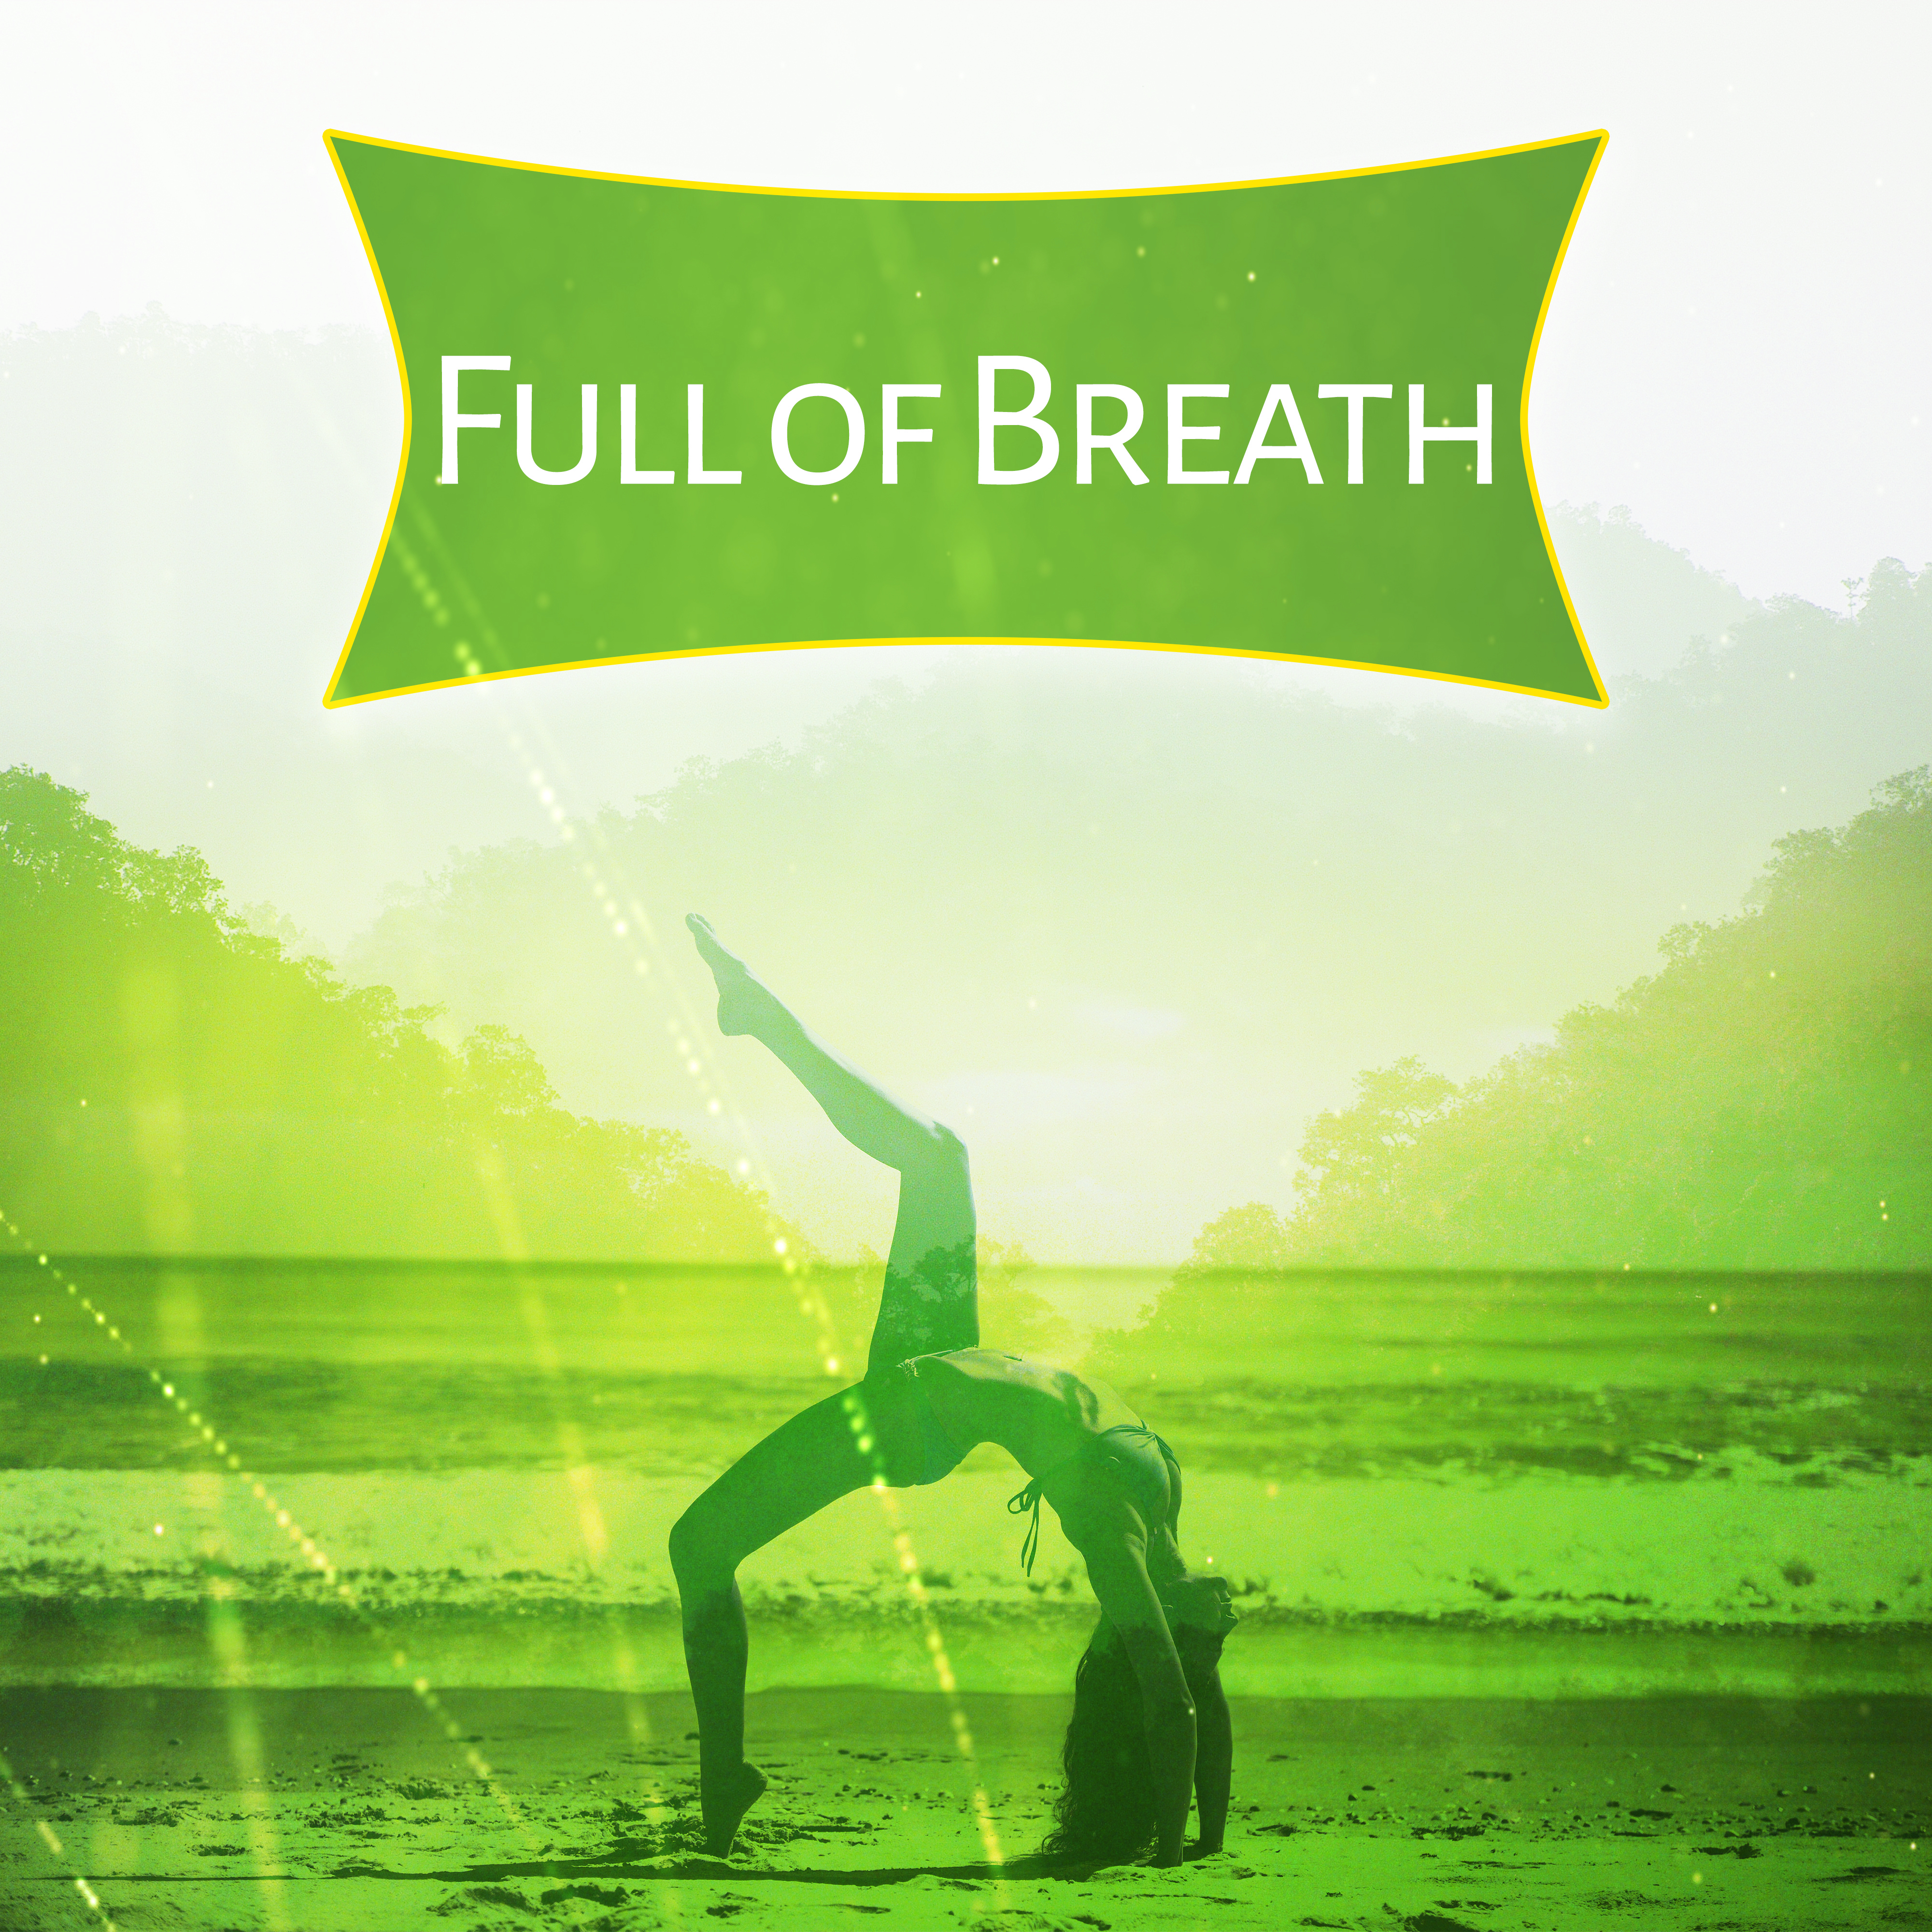 Full of Breath – Peaceful Sounds of Nature, Helpful for Deep Meditation, New Age Music for Yoga